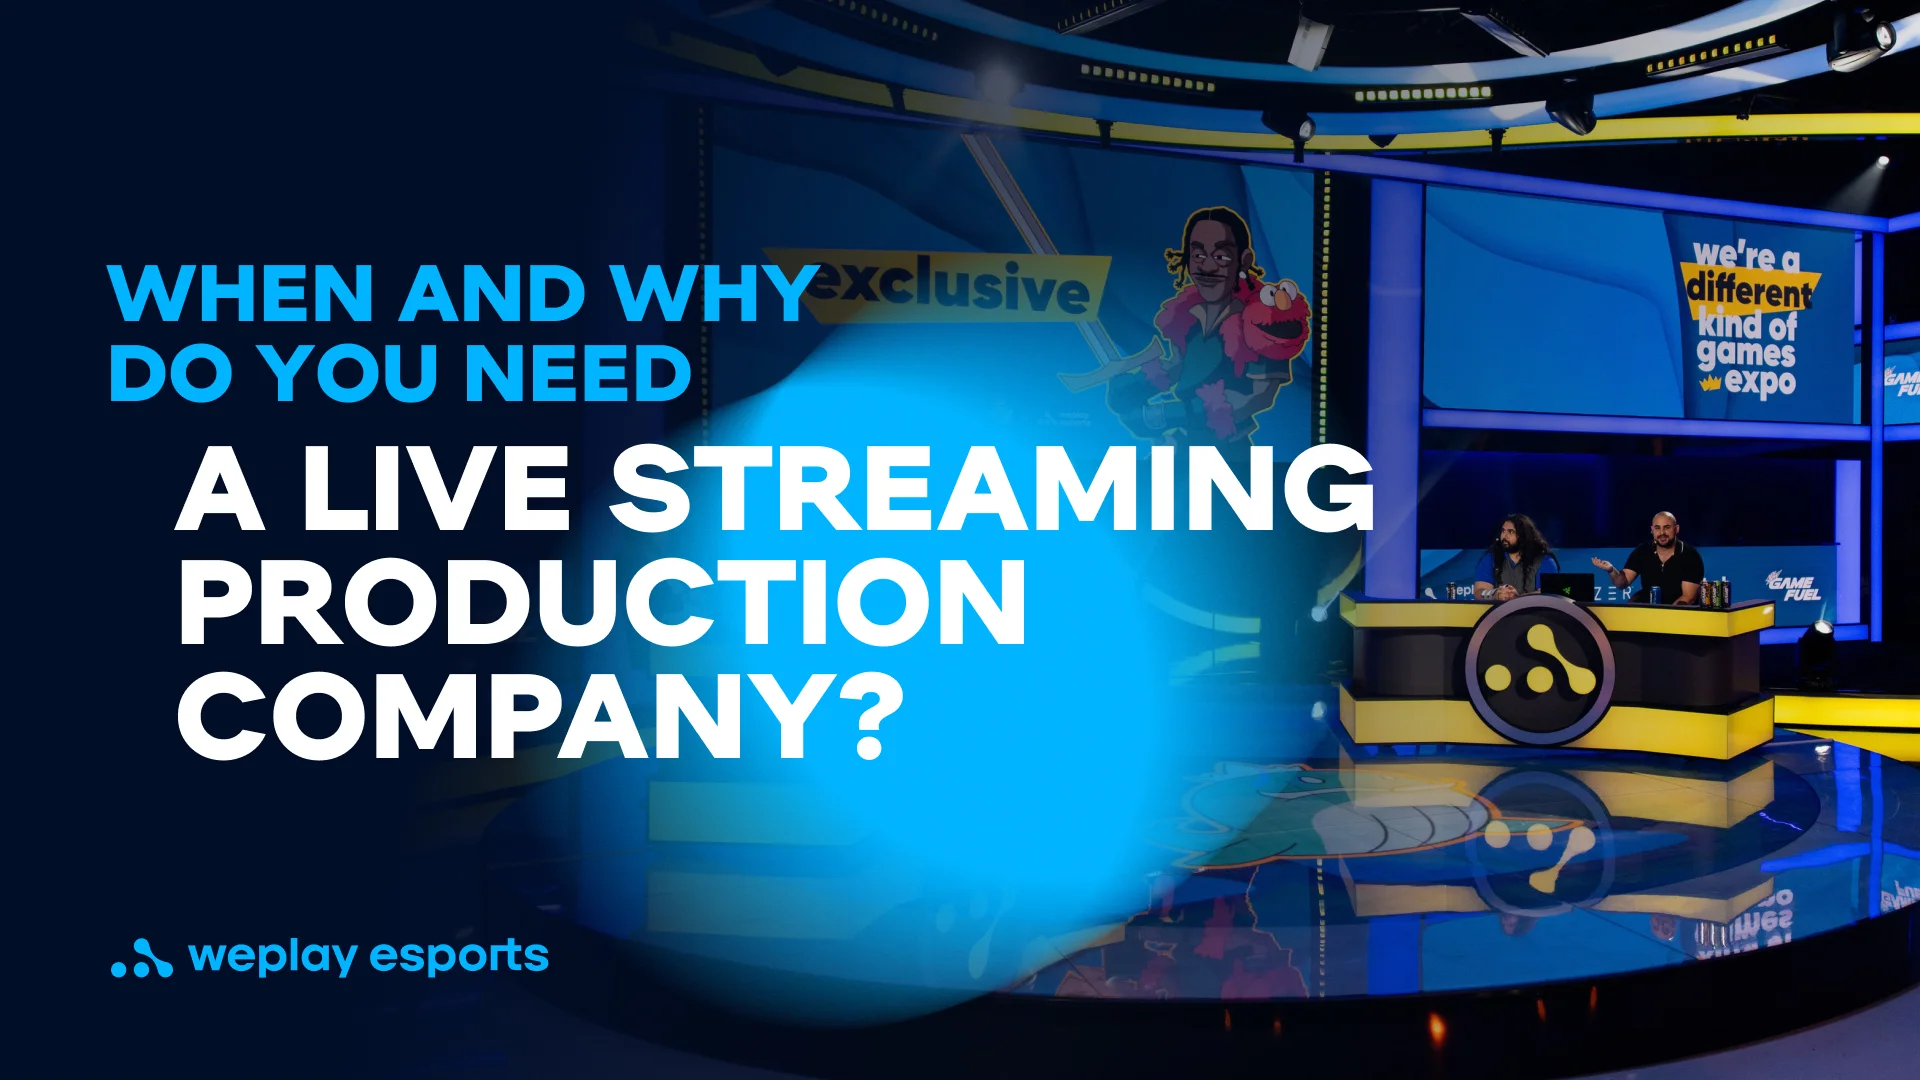 When and why do you need a live streaming production company?